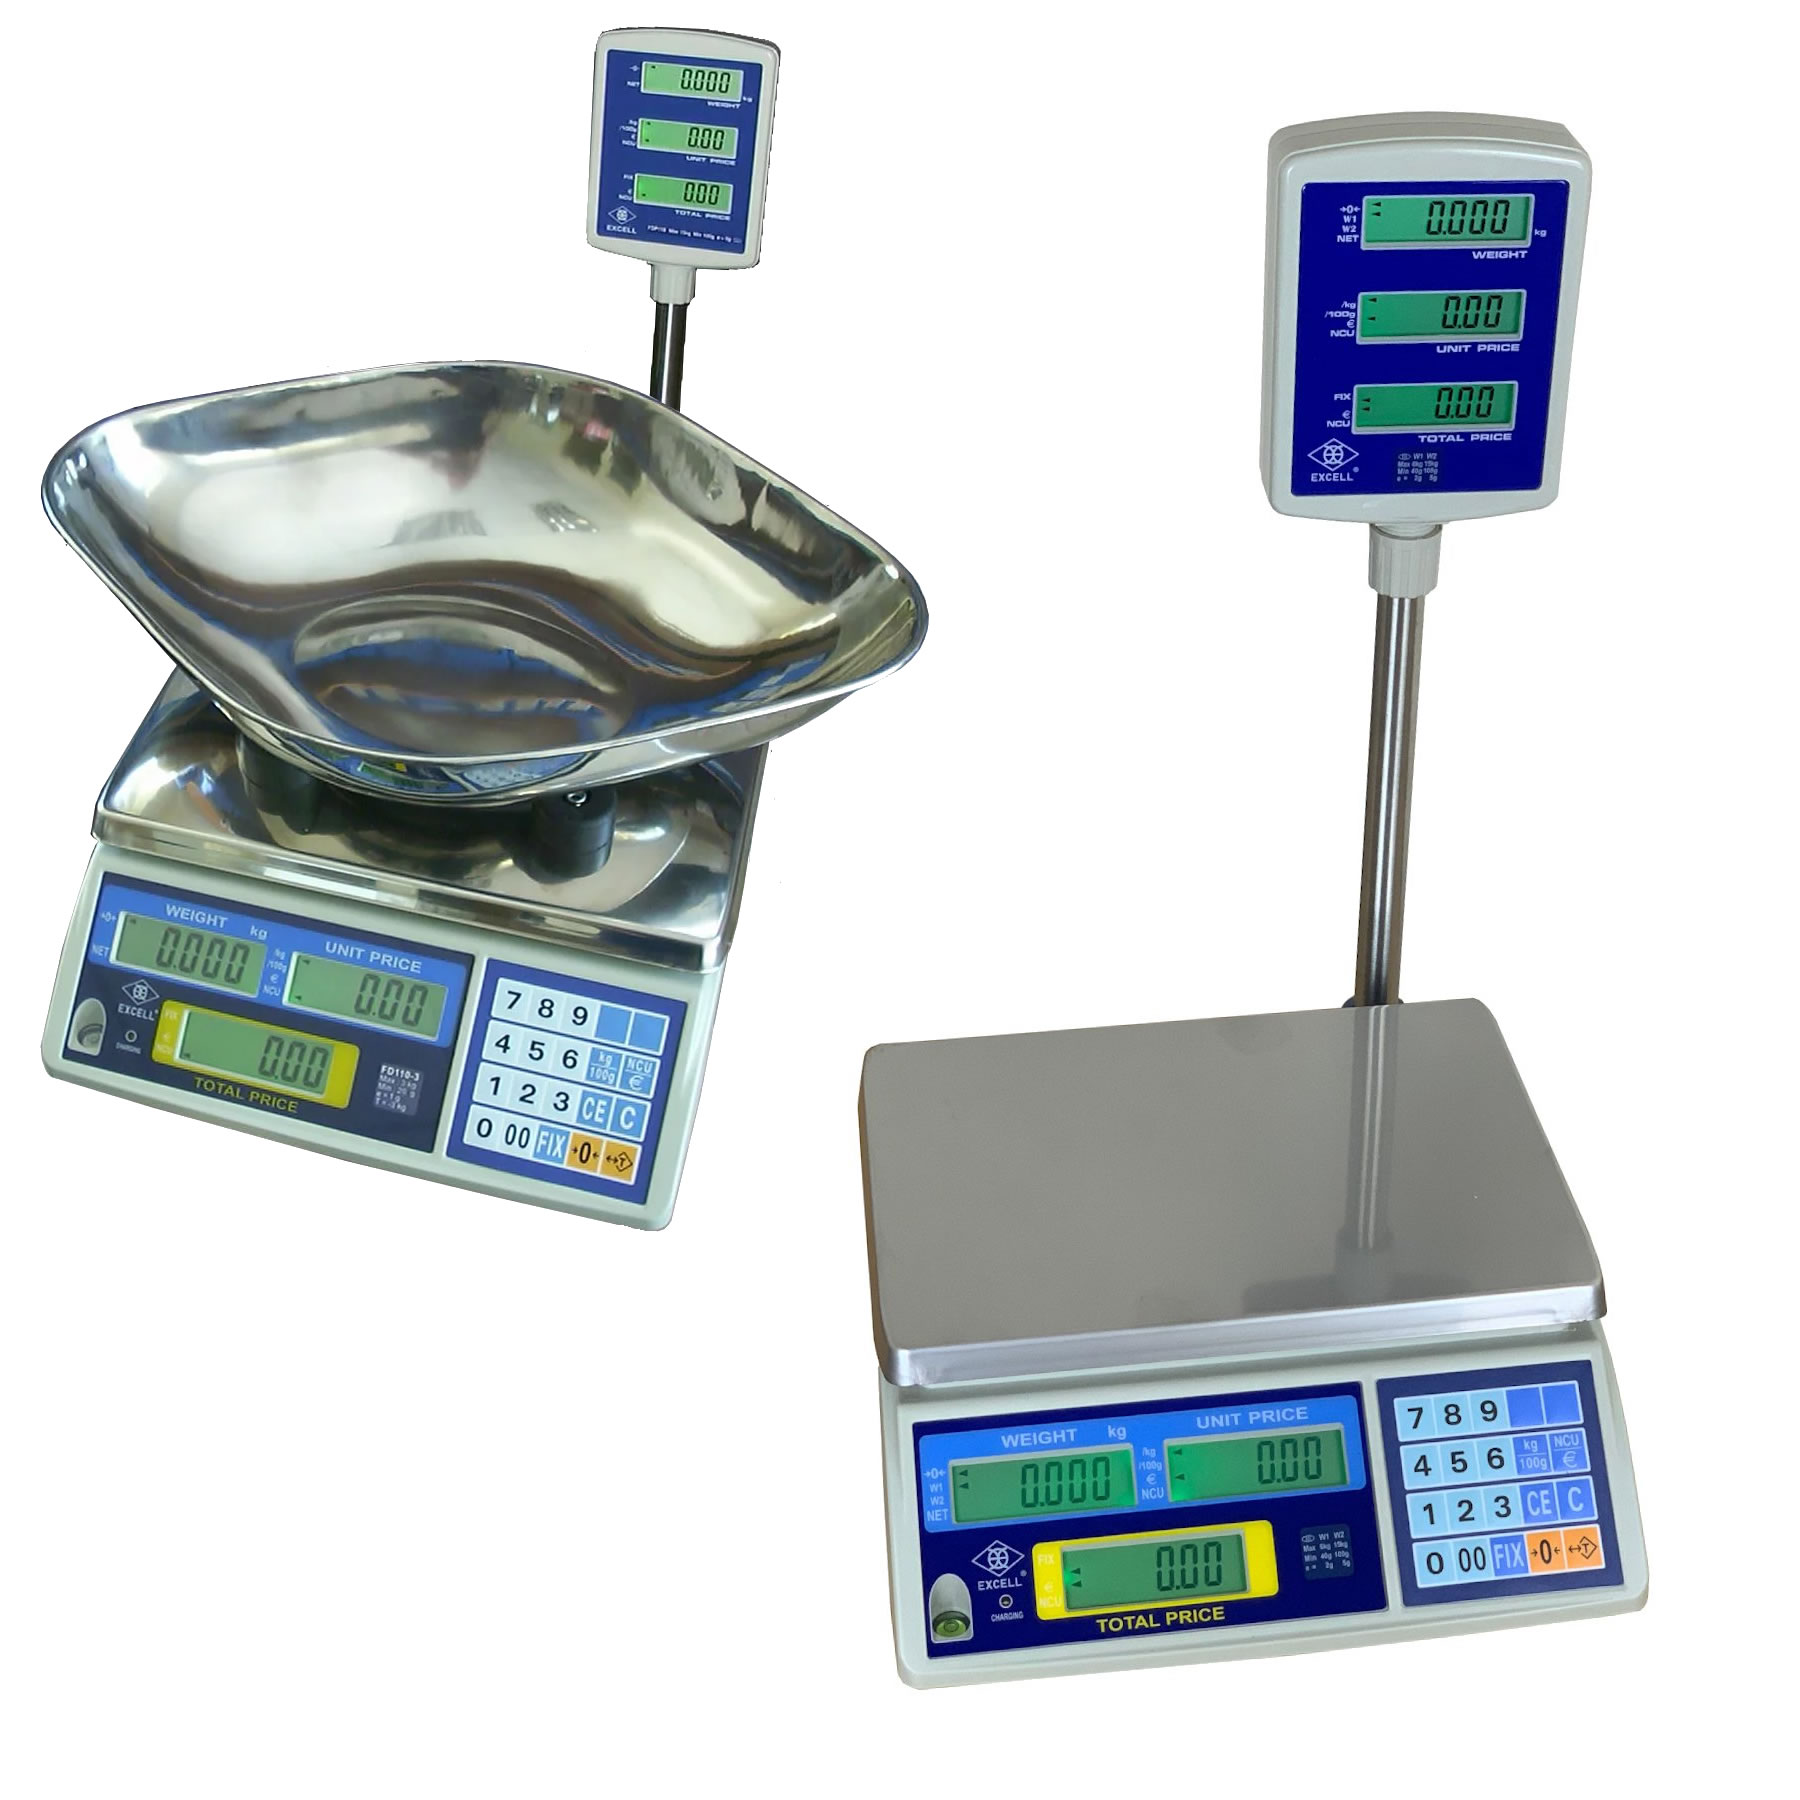 Excell FD3 Retail Scale with Pole Display